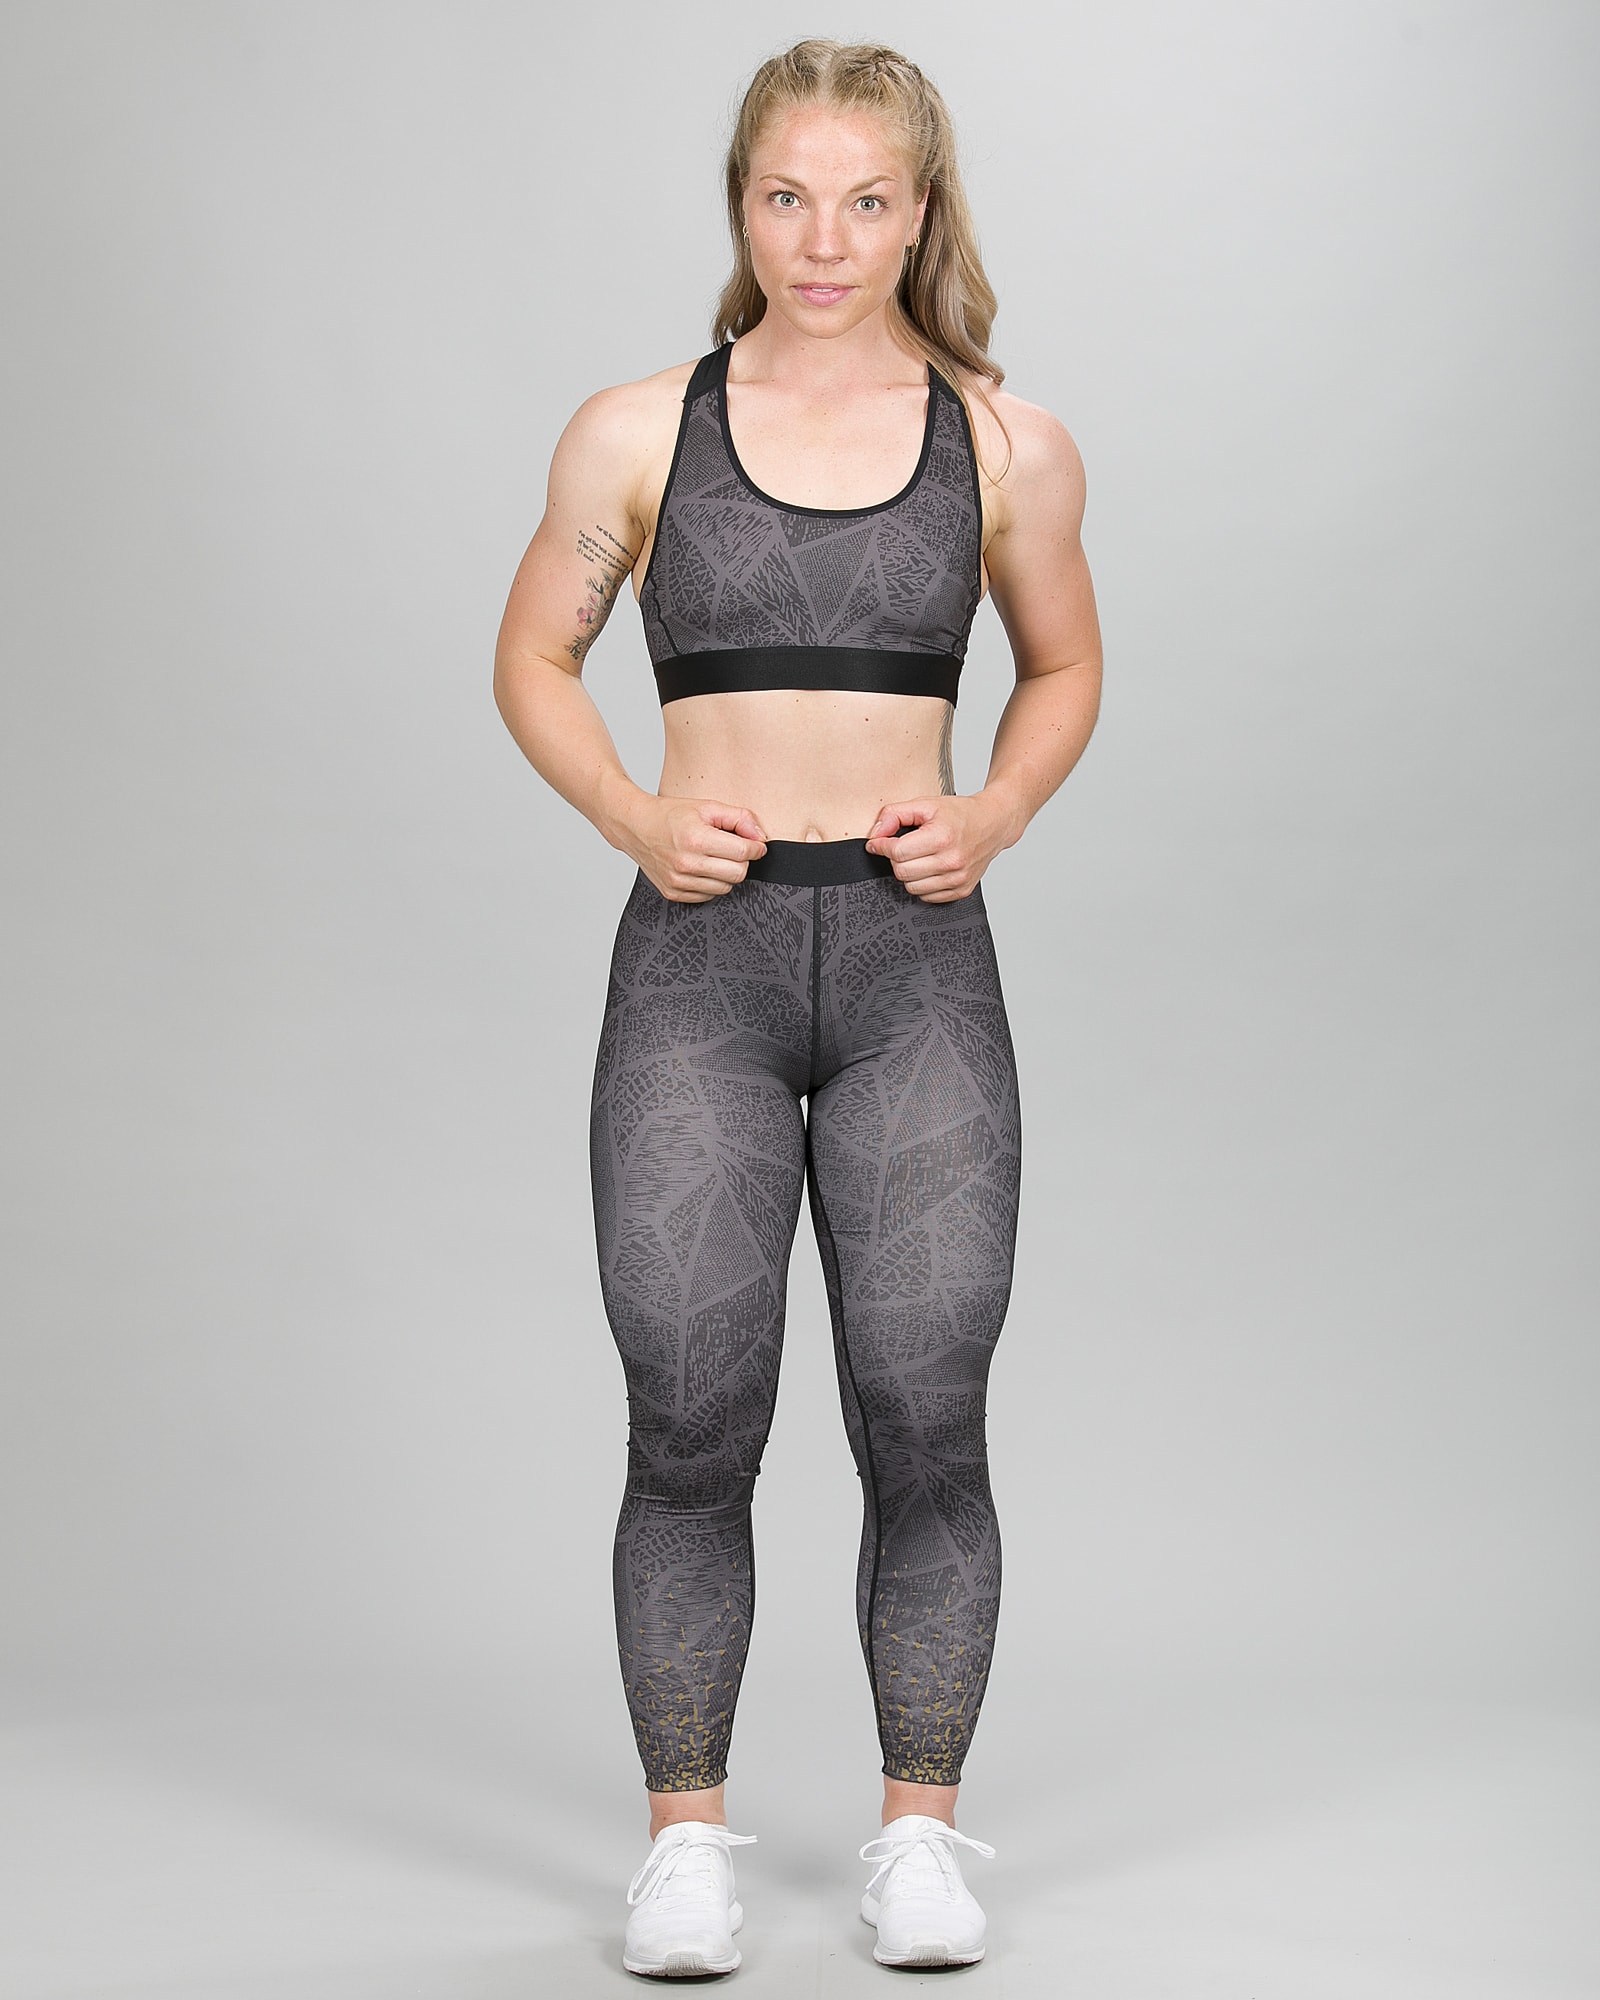 Skiny SK86 Long Running Tights 083114 and Crop Top 082701 - Dark Graphic e